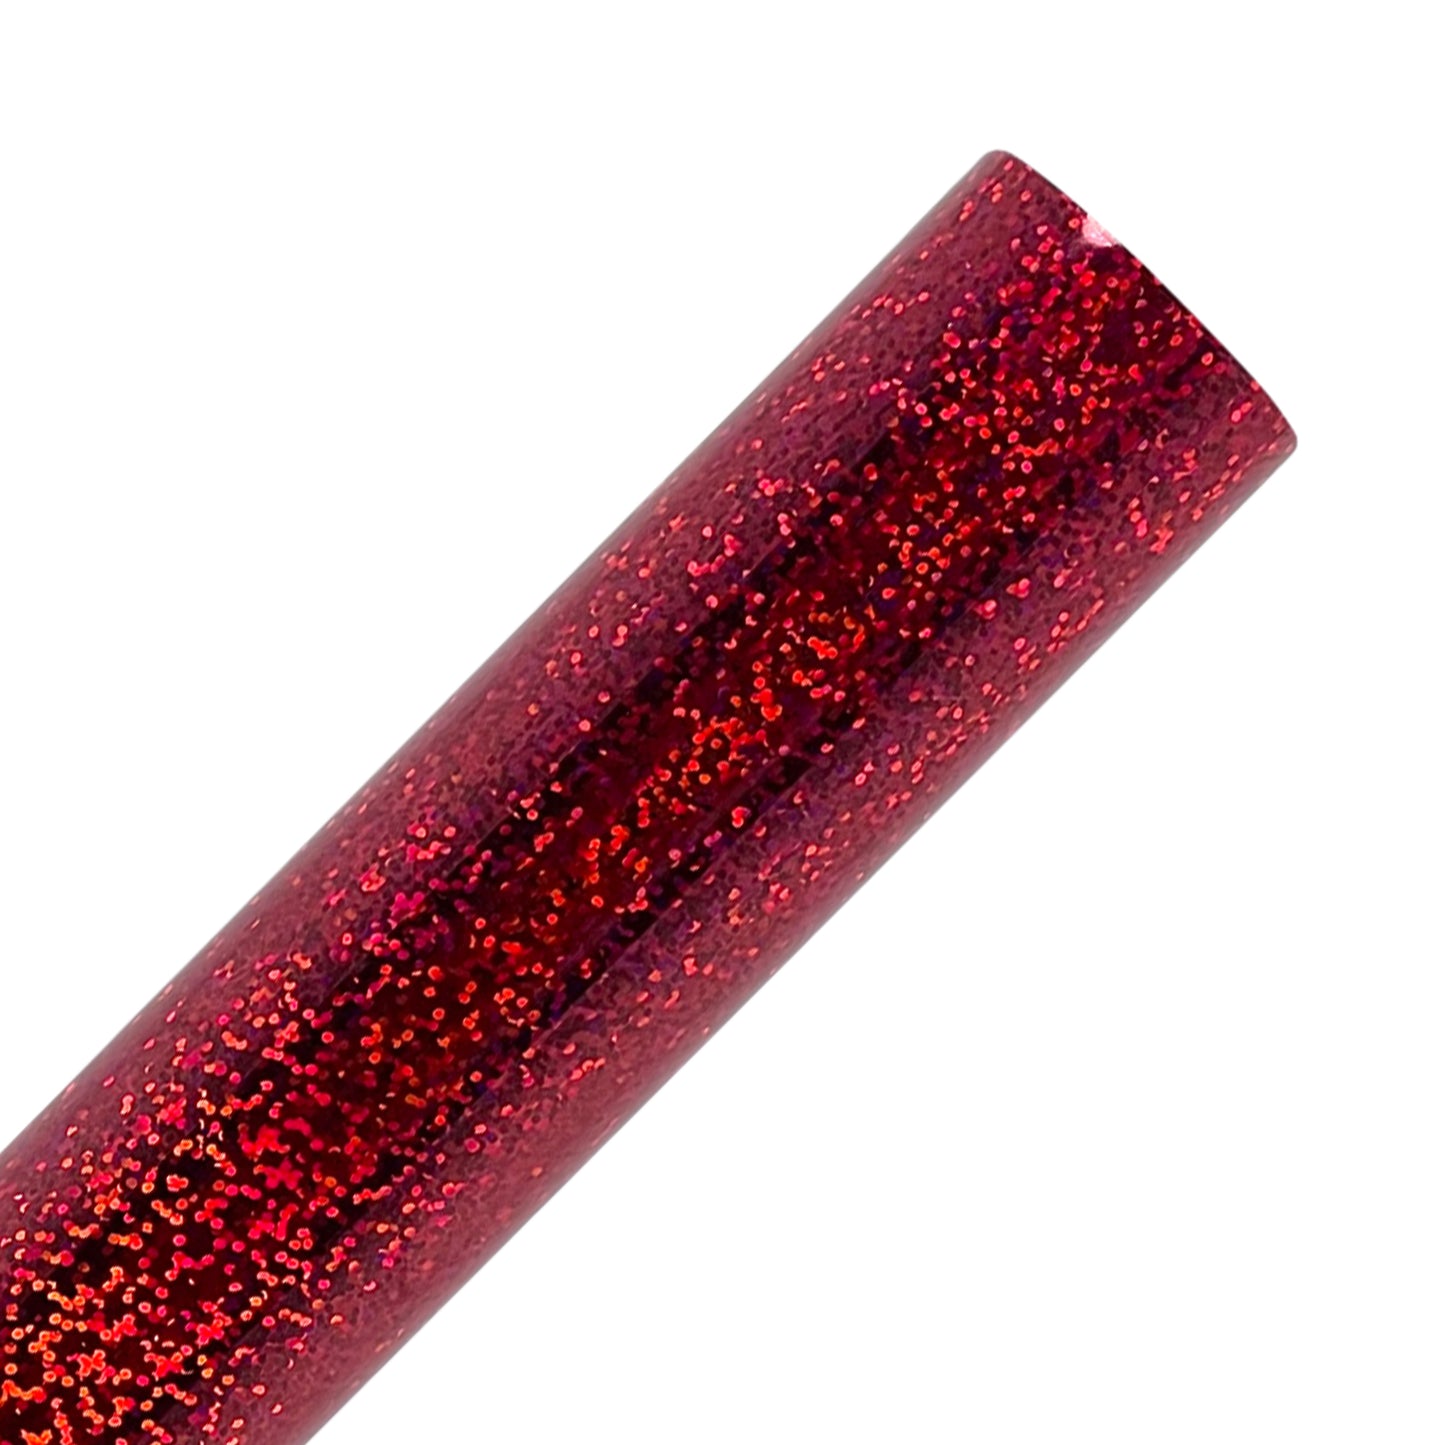 Red Holographic Sparkle Heat Transfer Vinyl Rolls By Craftables